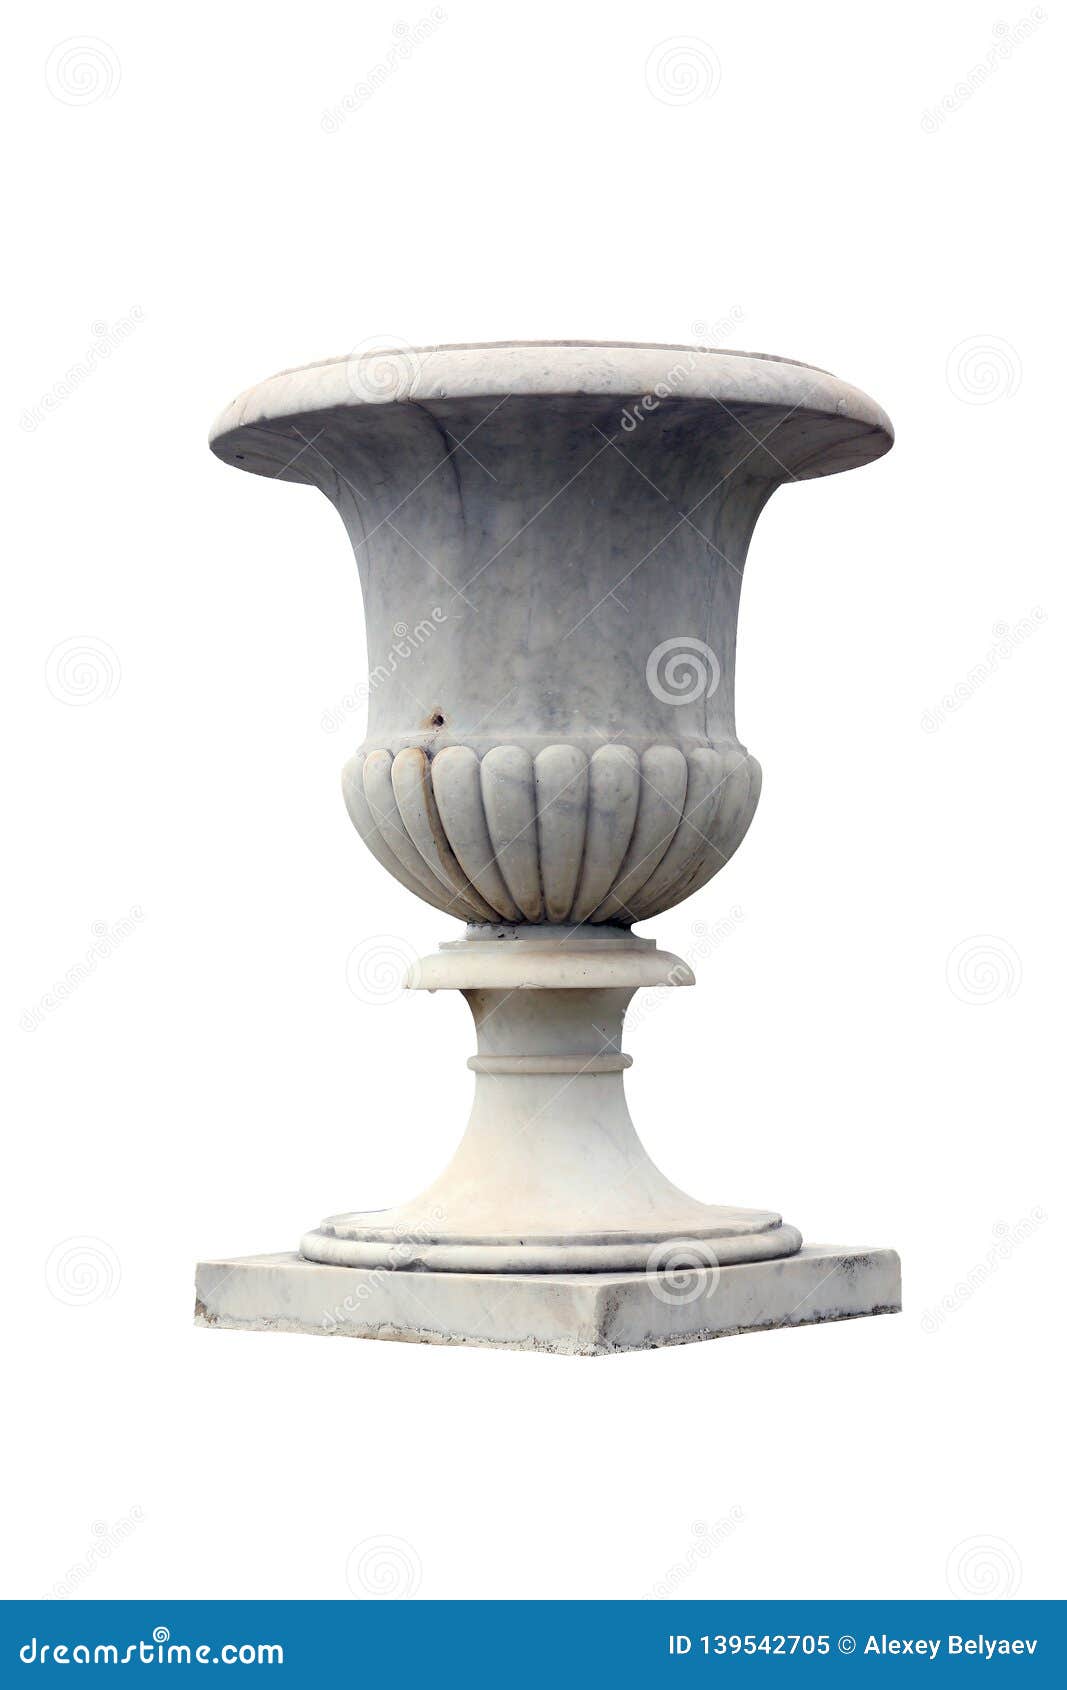 big beautiful white marble vase as small architectural forms isolated background